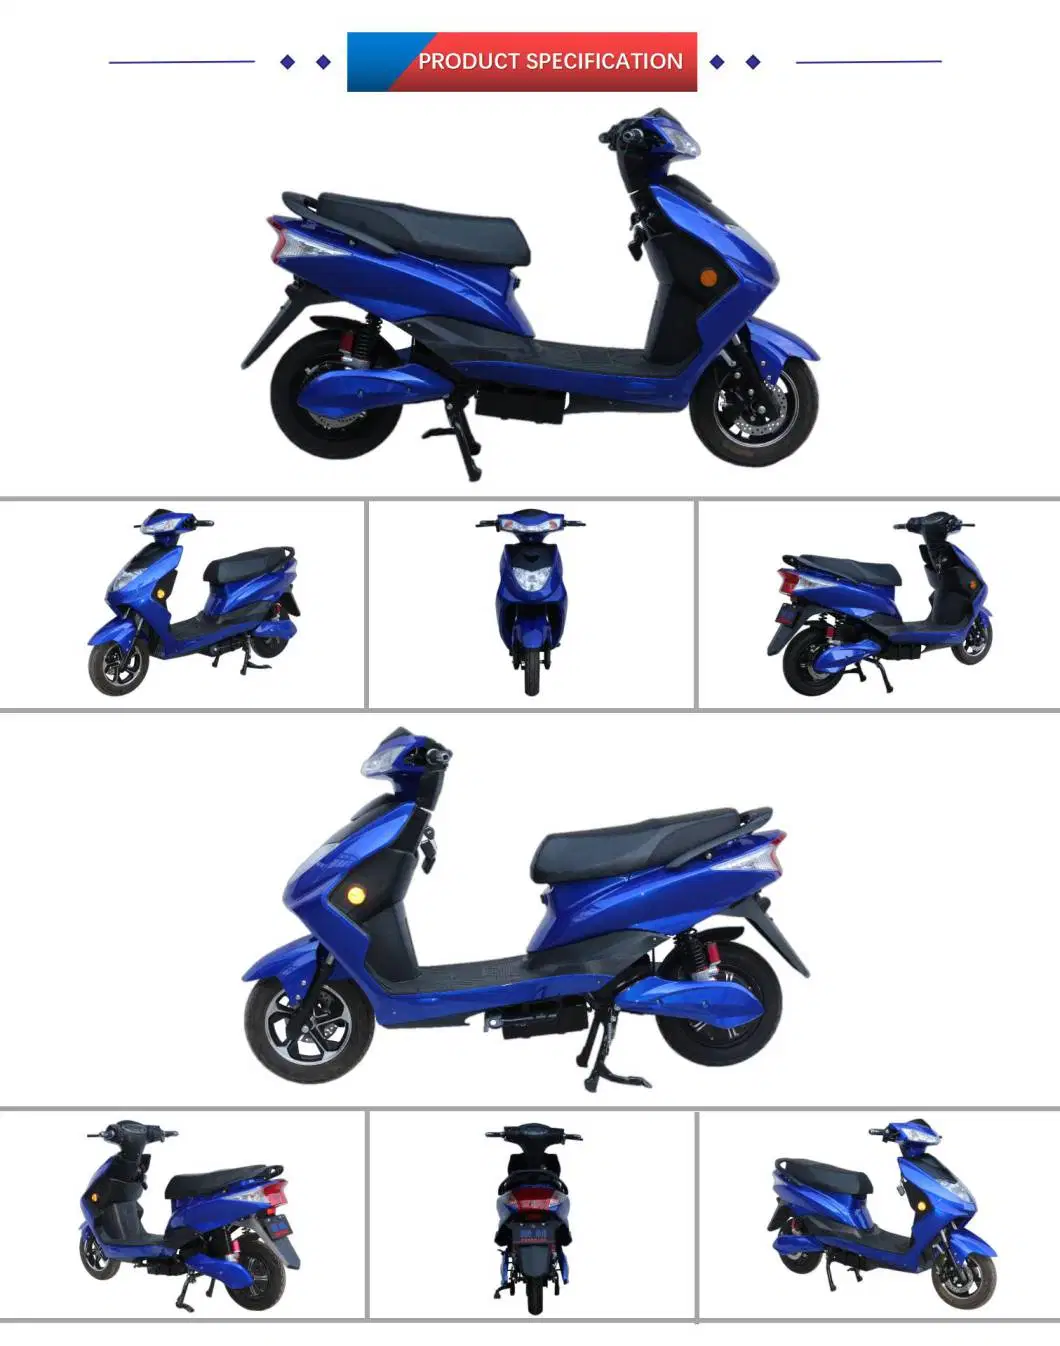 Cheap and Fashionable Motor 800W/1000W 60V/72V Adult Electric Motorcycles for Sale